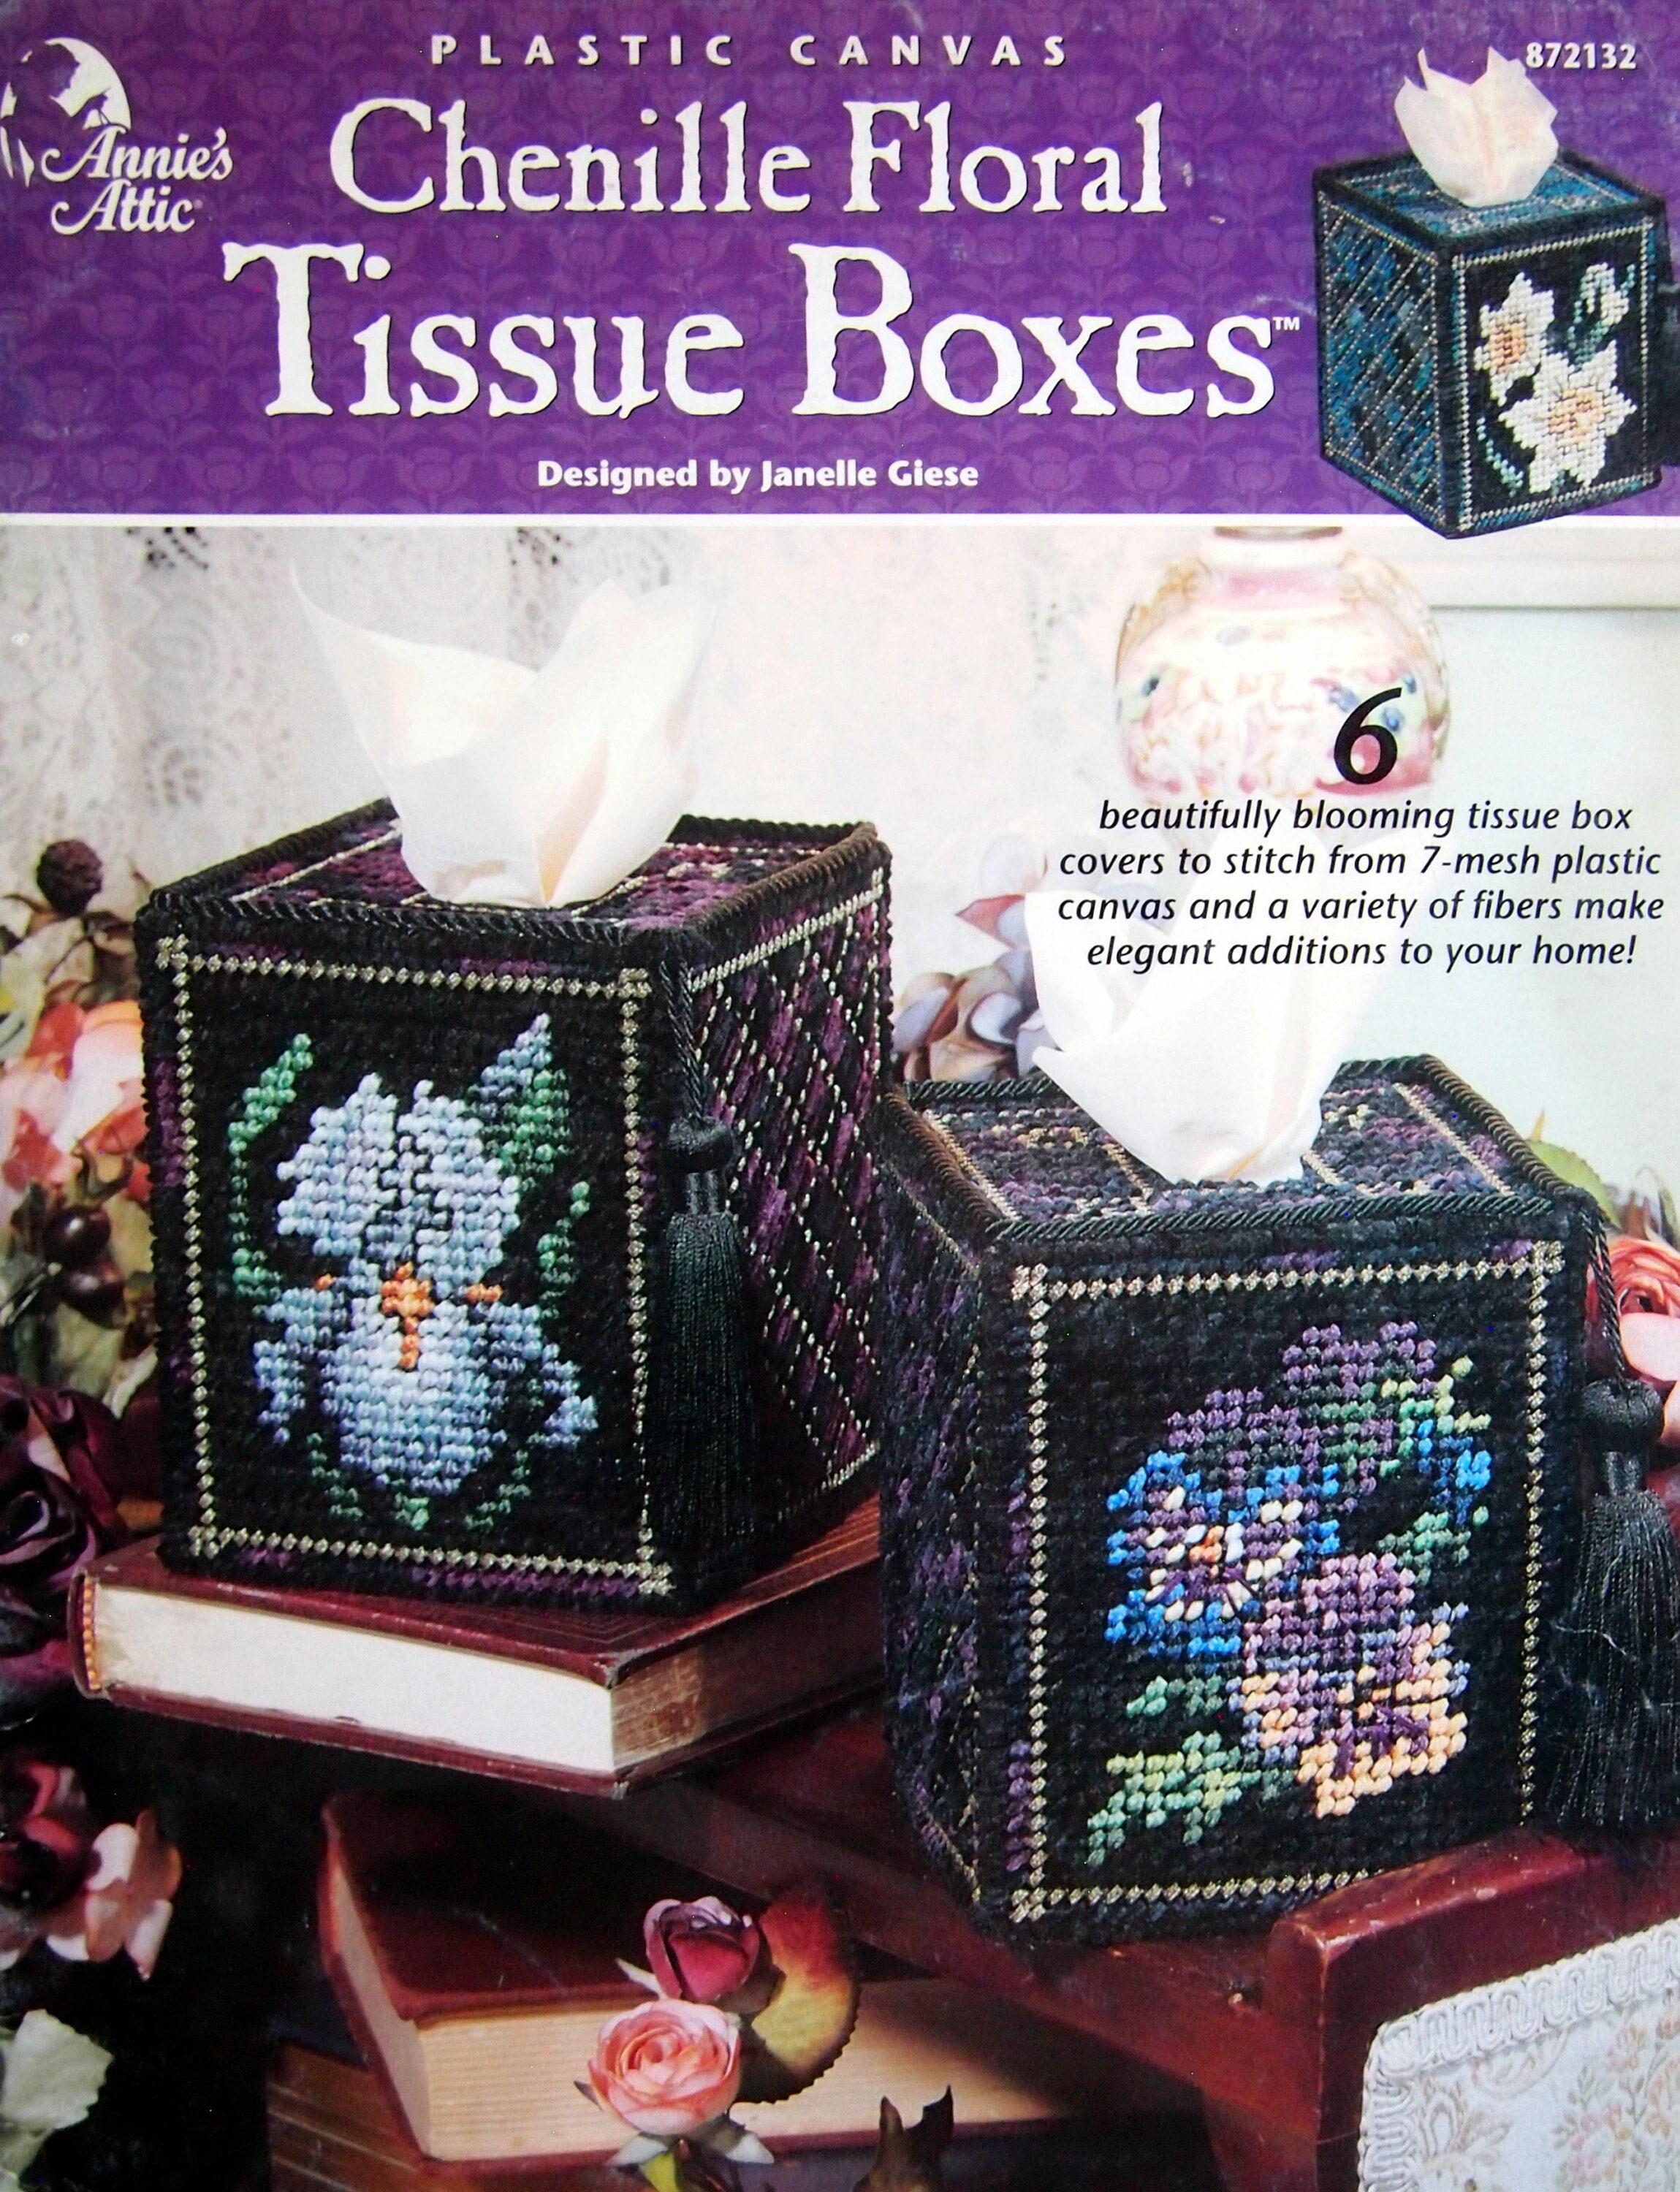 Chenille Floral Tissue Boxes by Janelle Giese and Annie's Attic